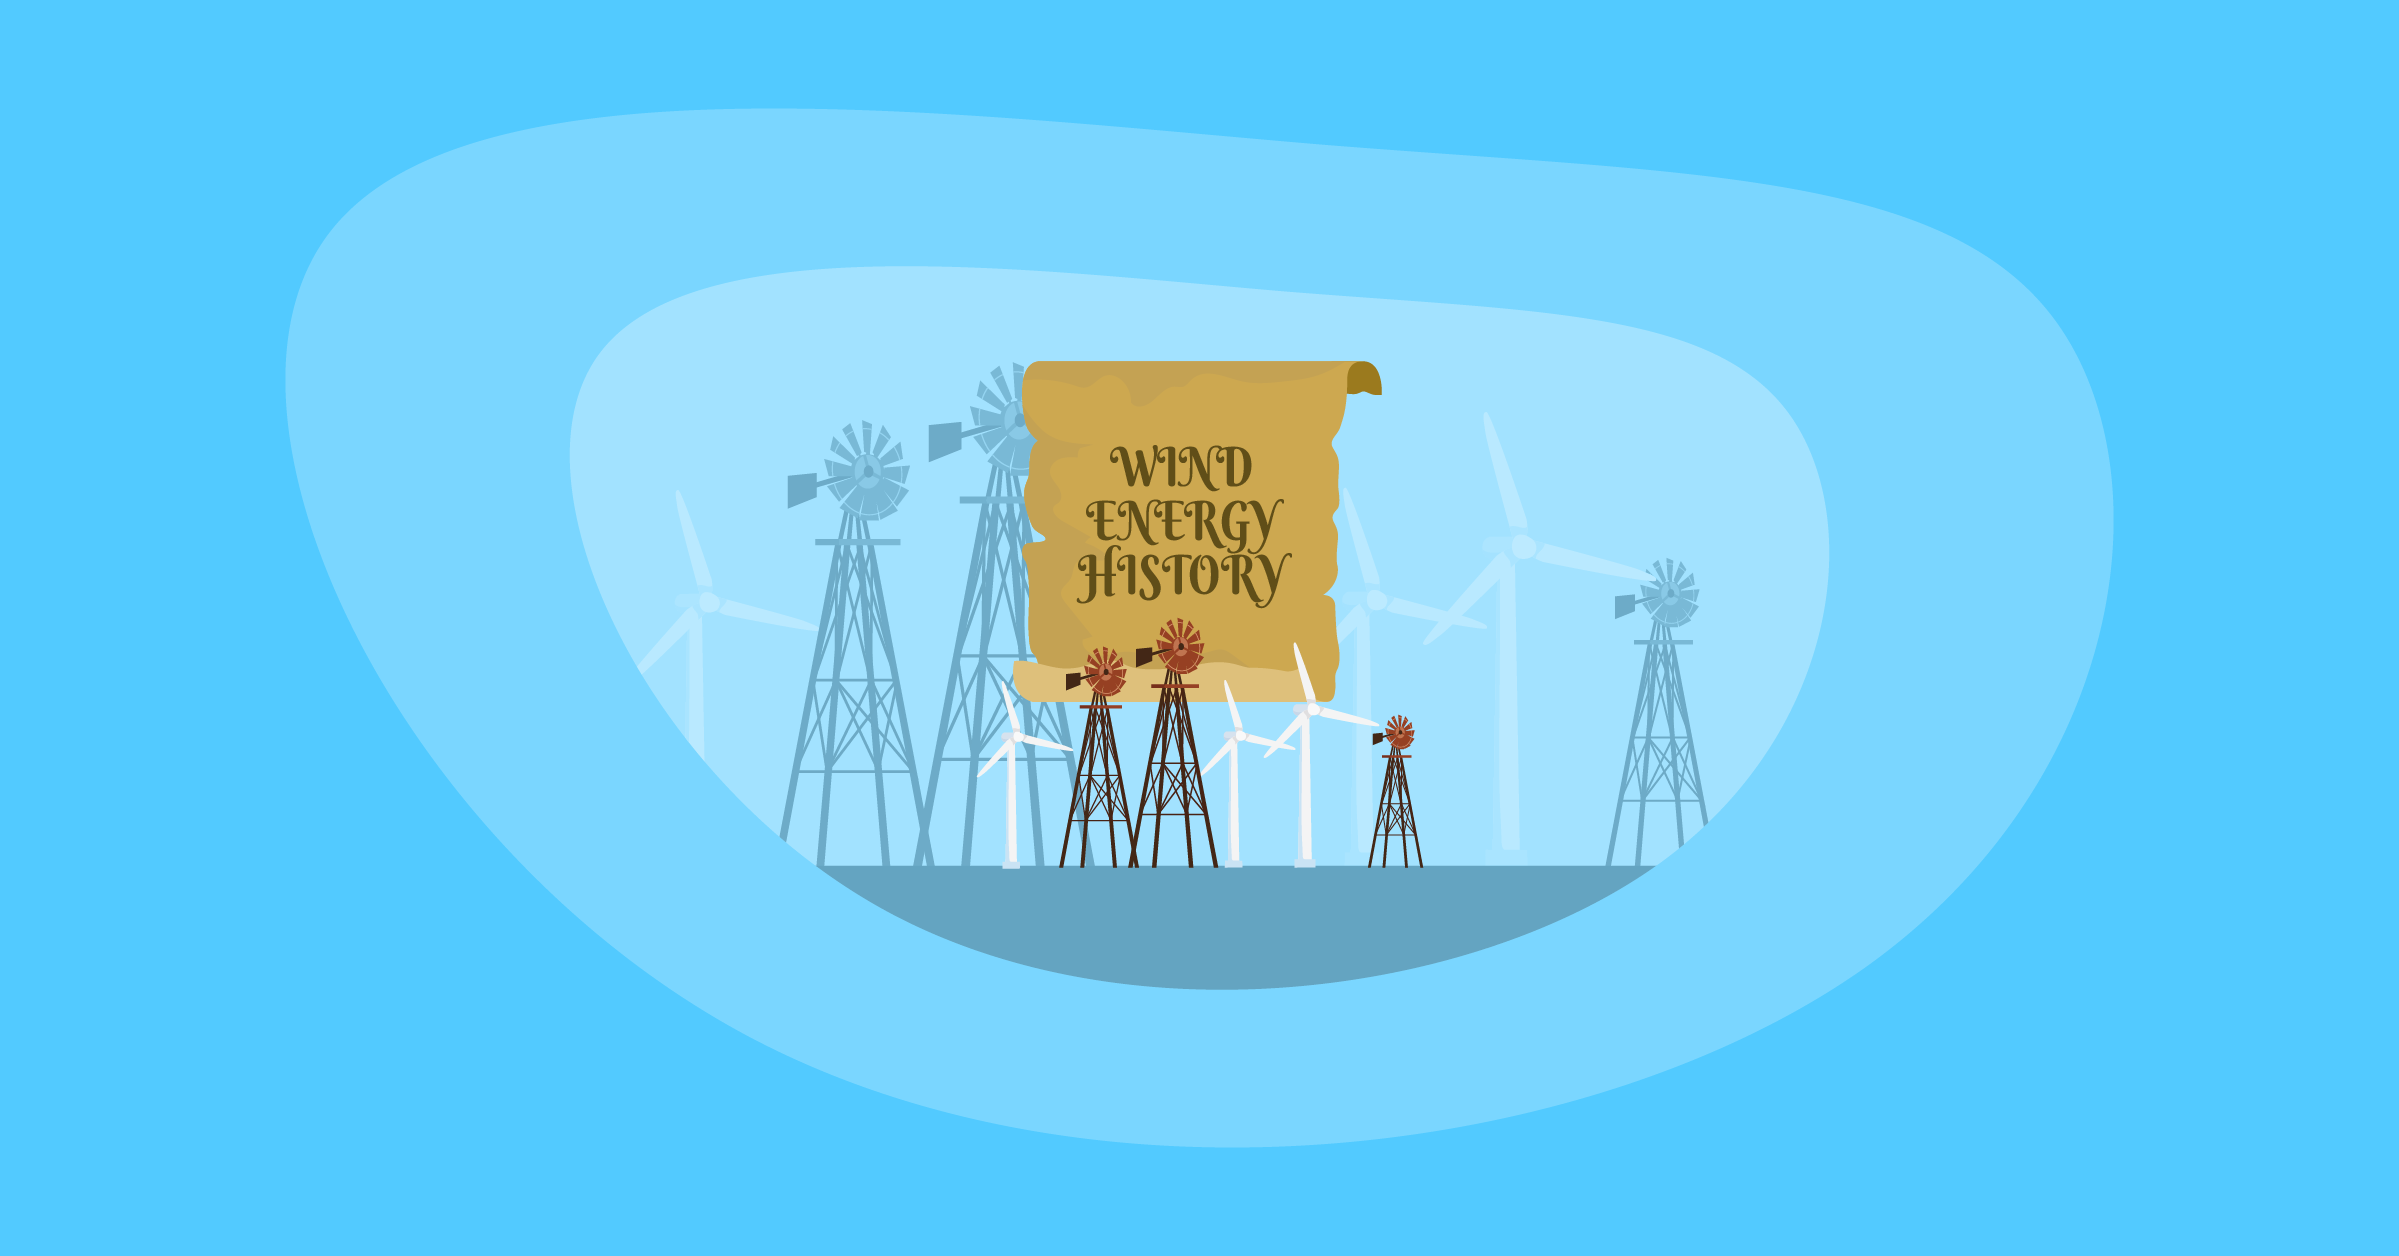 A Brief History Of Wind Power